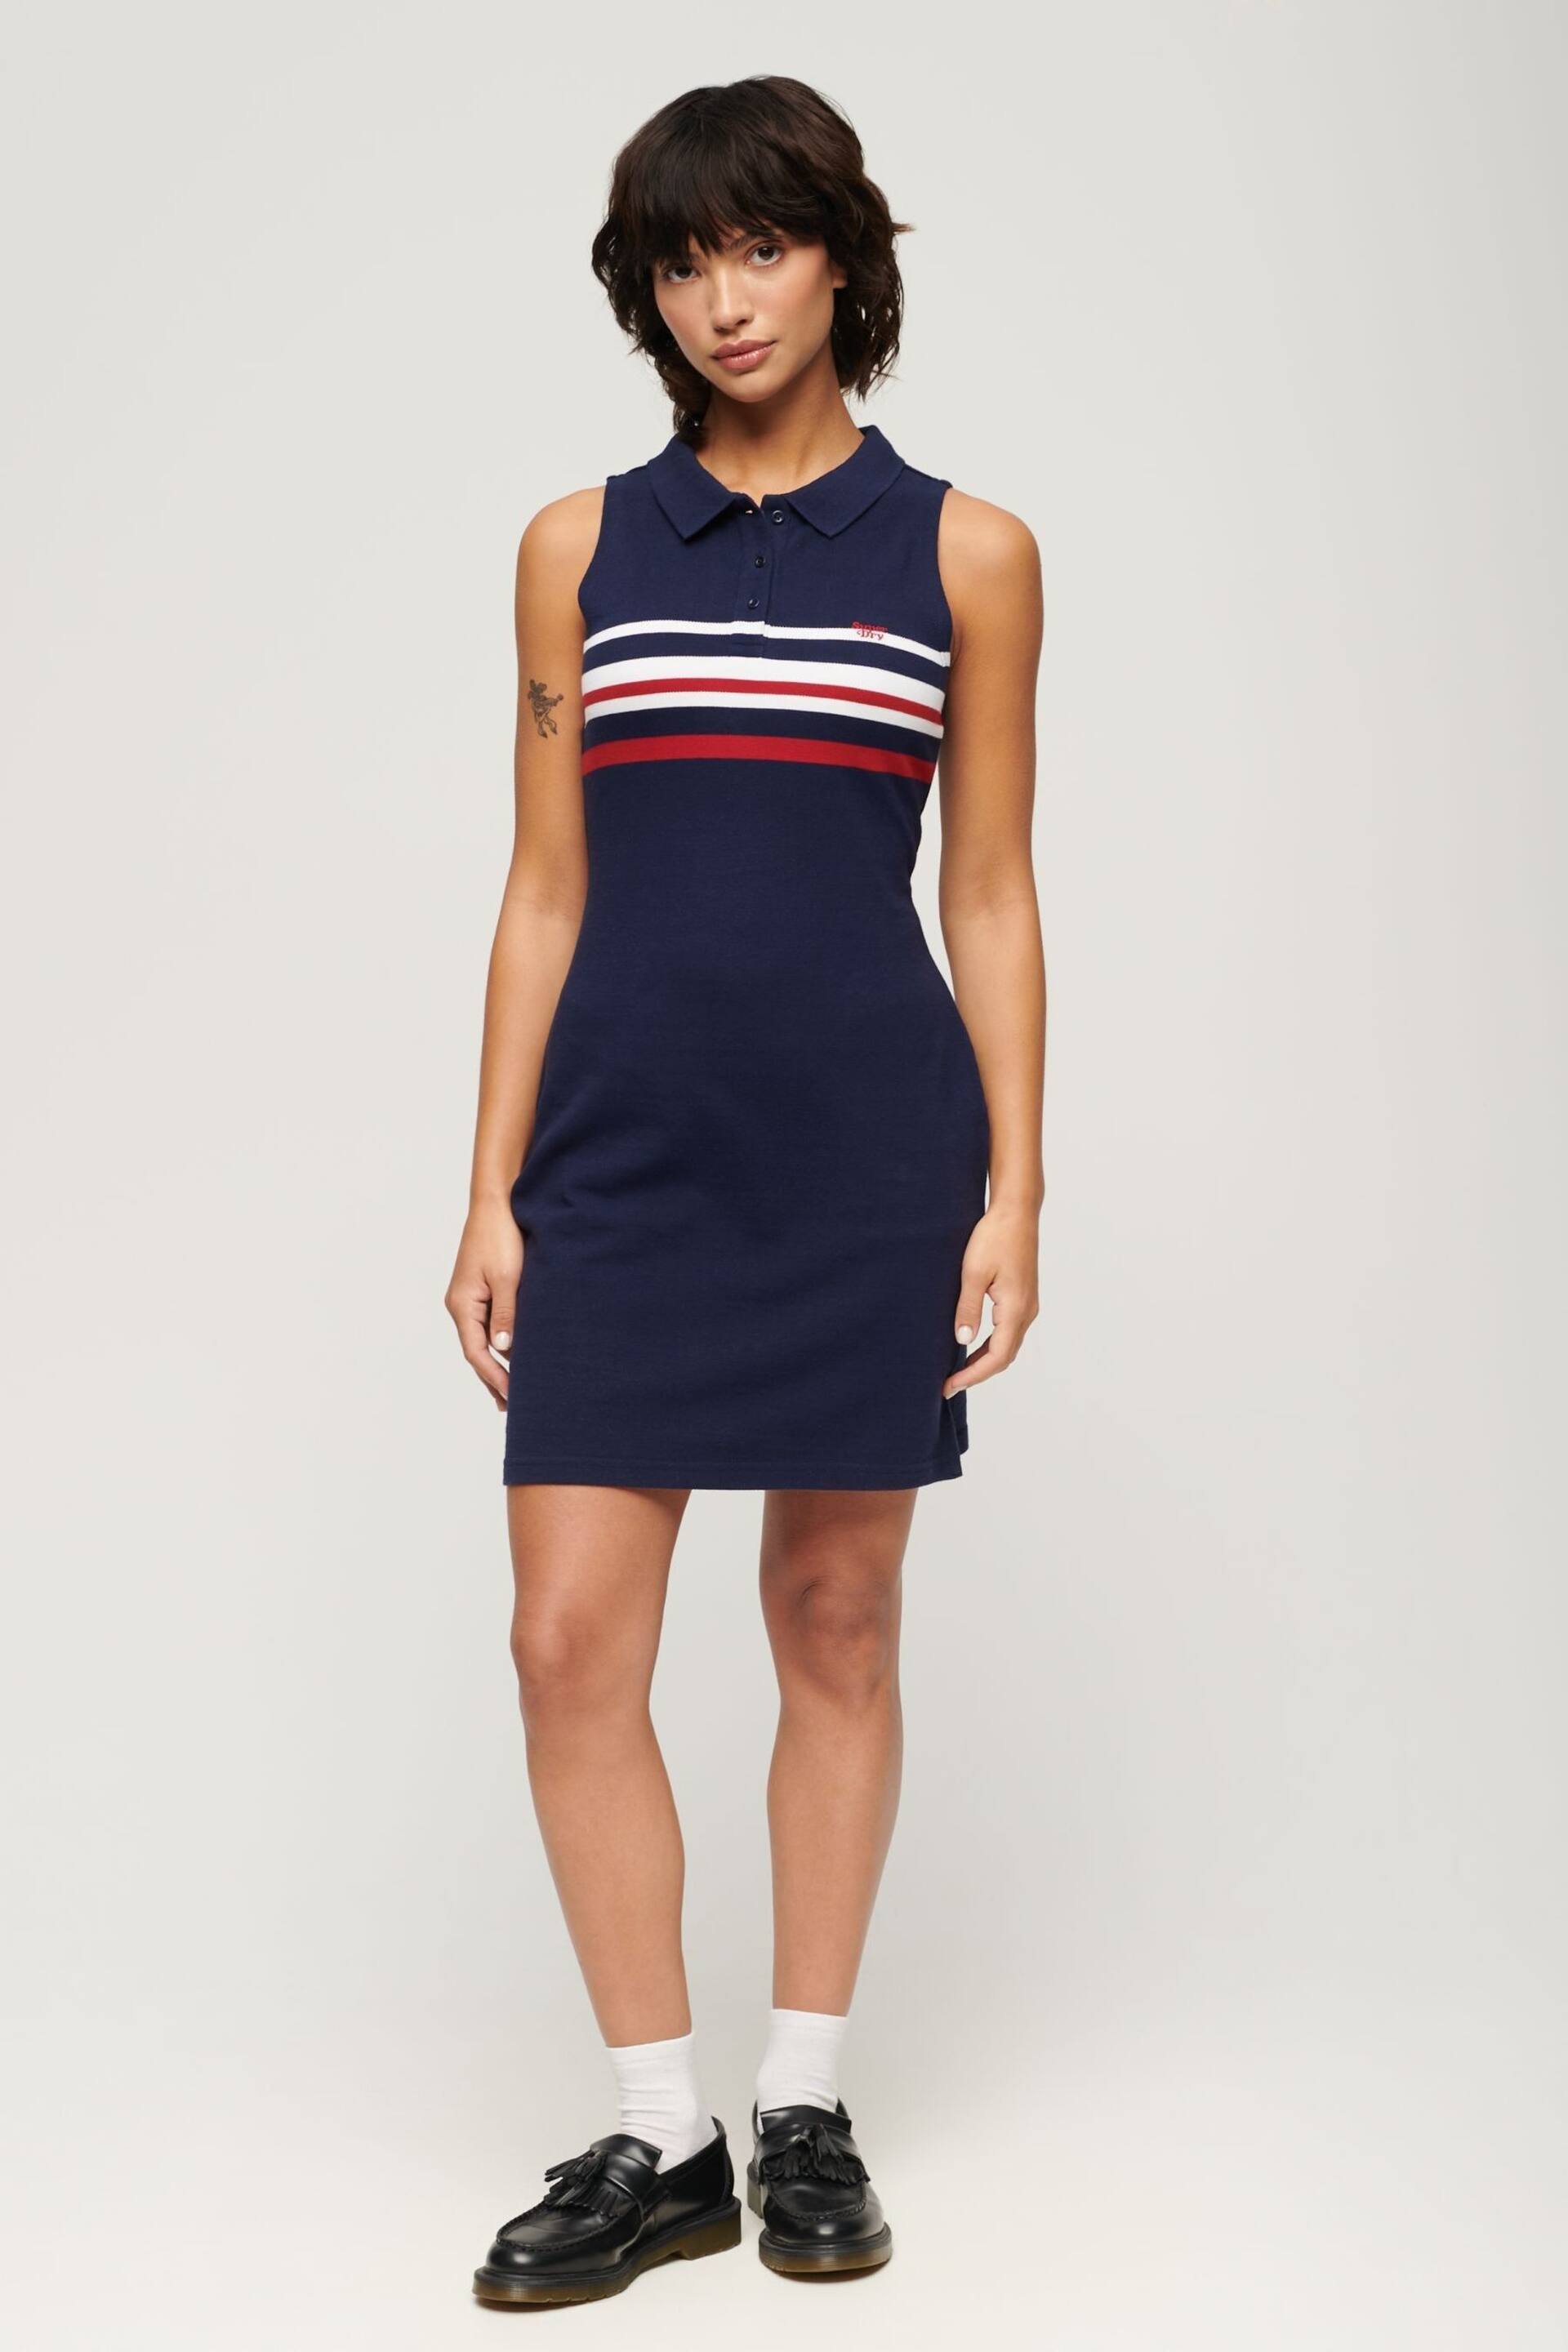 Superdry Blue Jersey Polo Mini Dress - Image 3 of 3